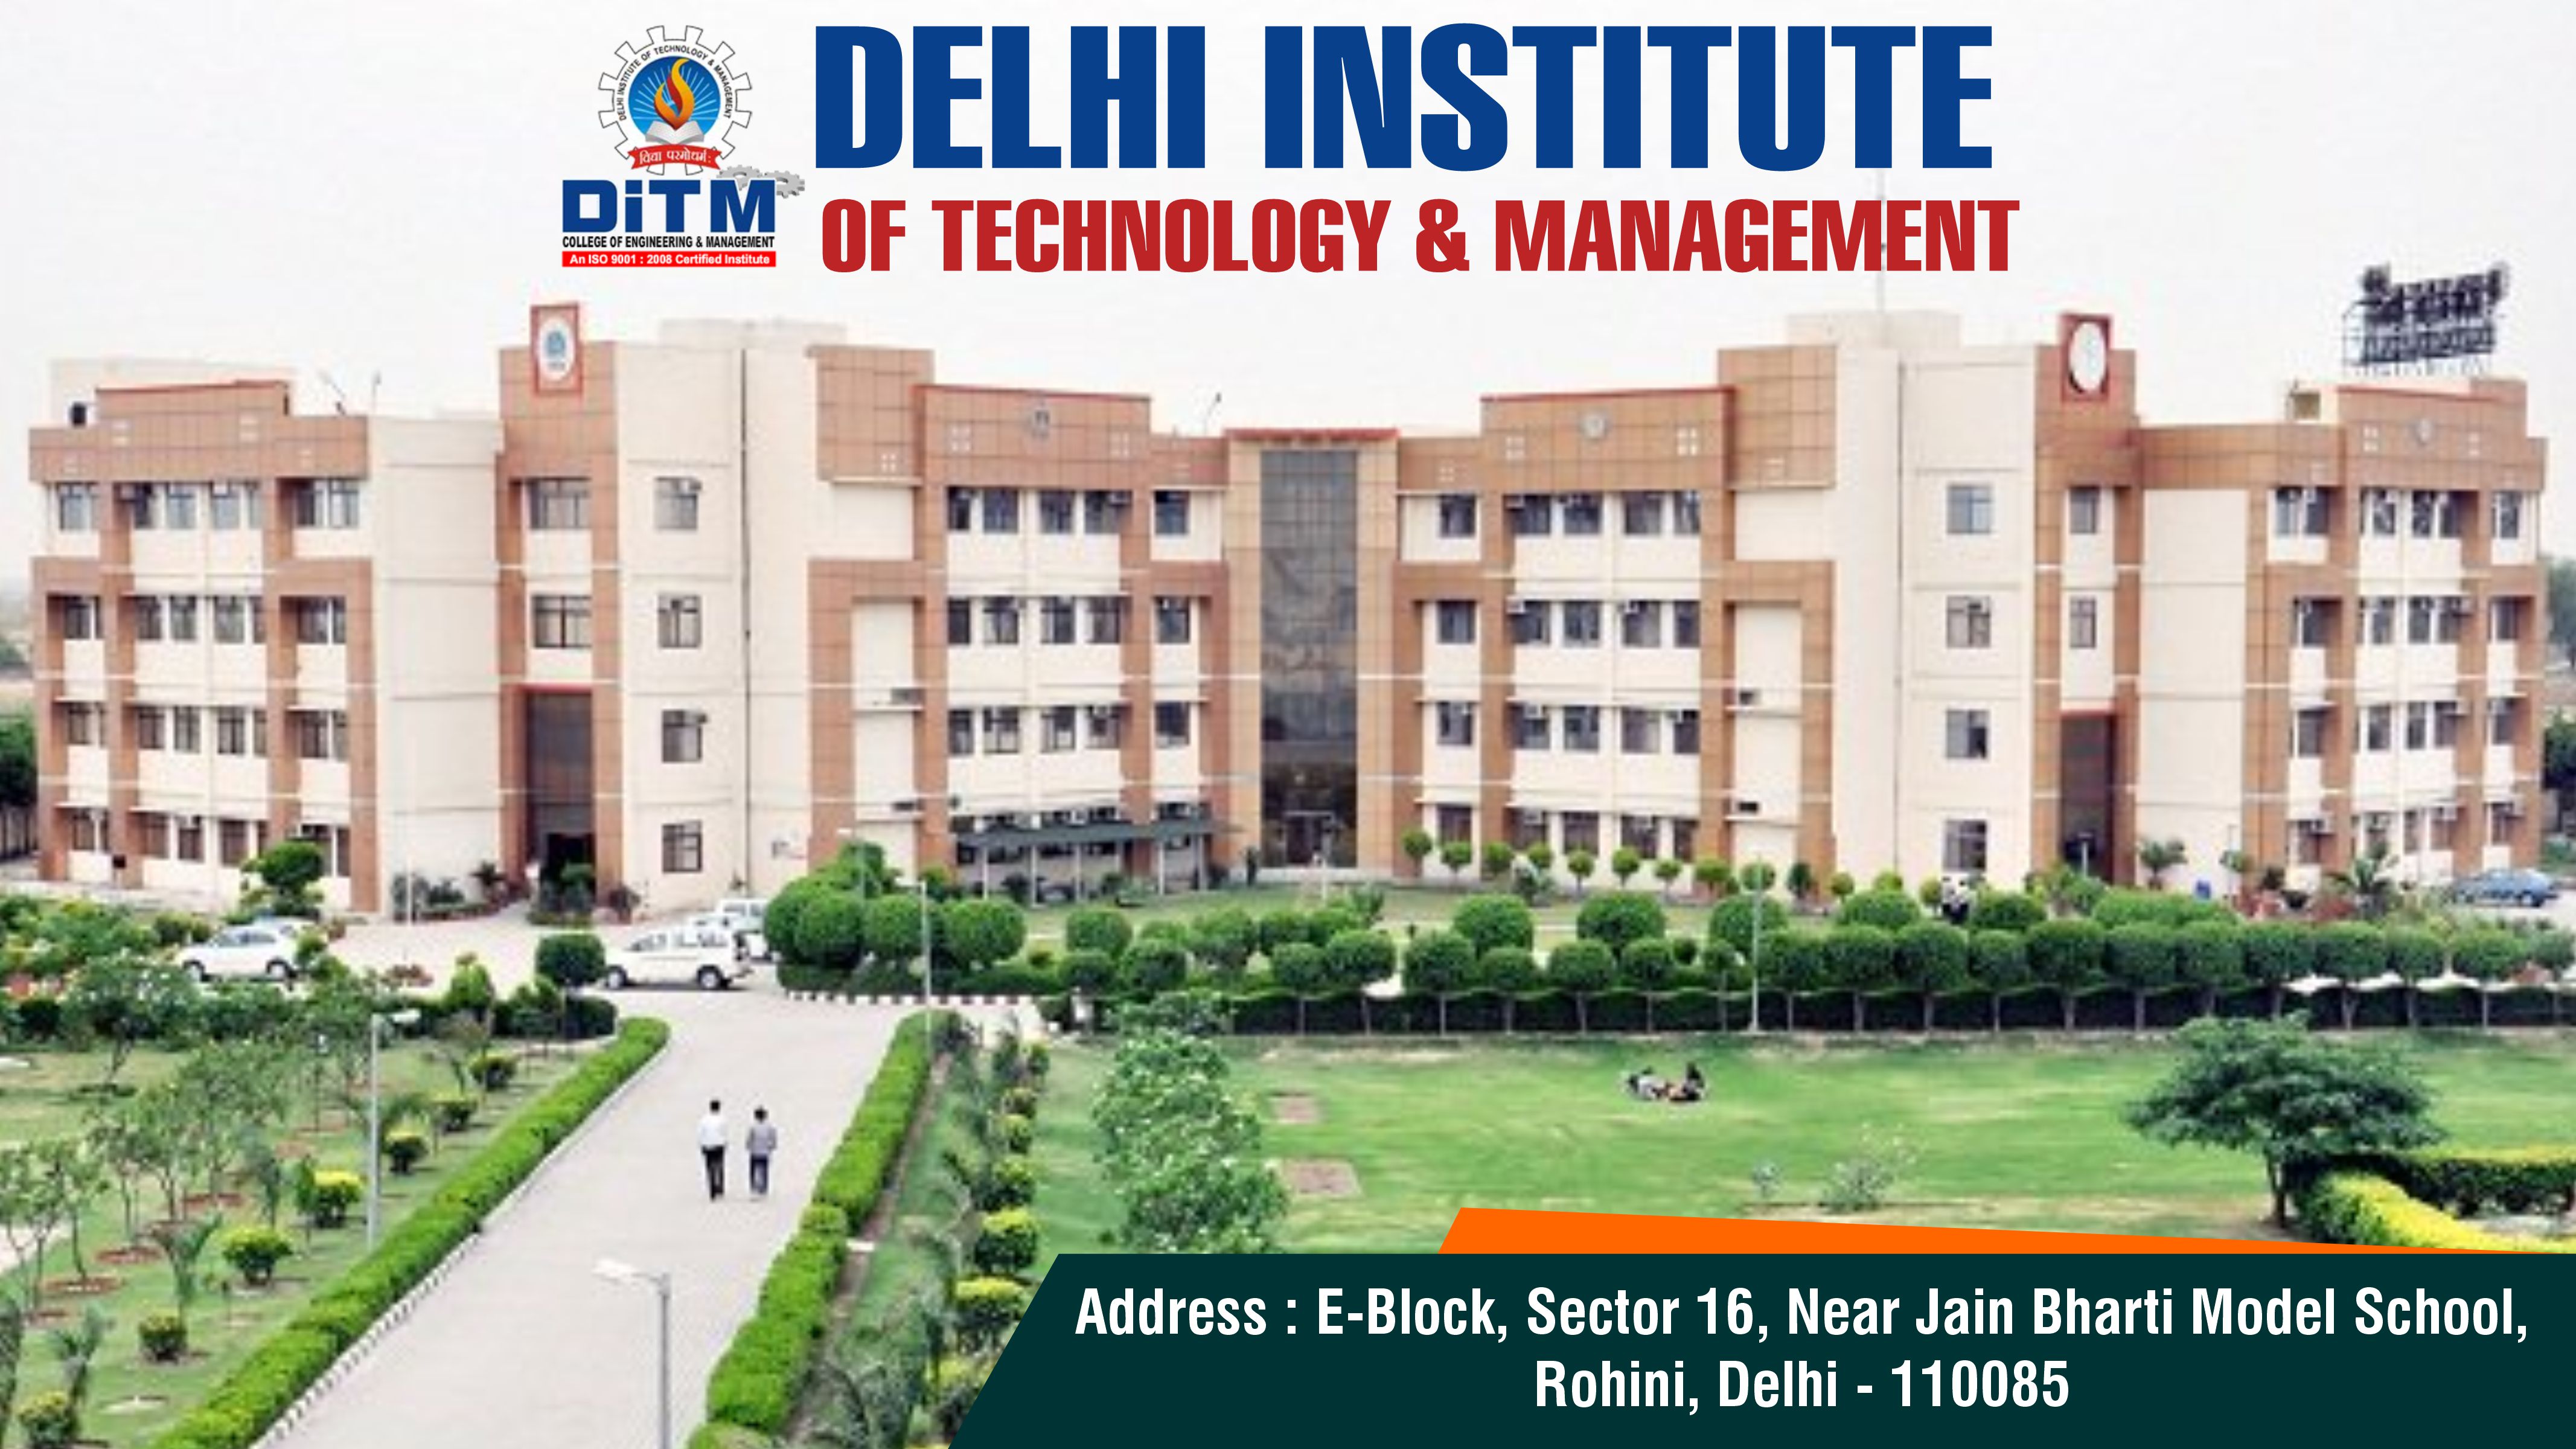 Out Side View of Delhi Institute of Technology & Management